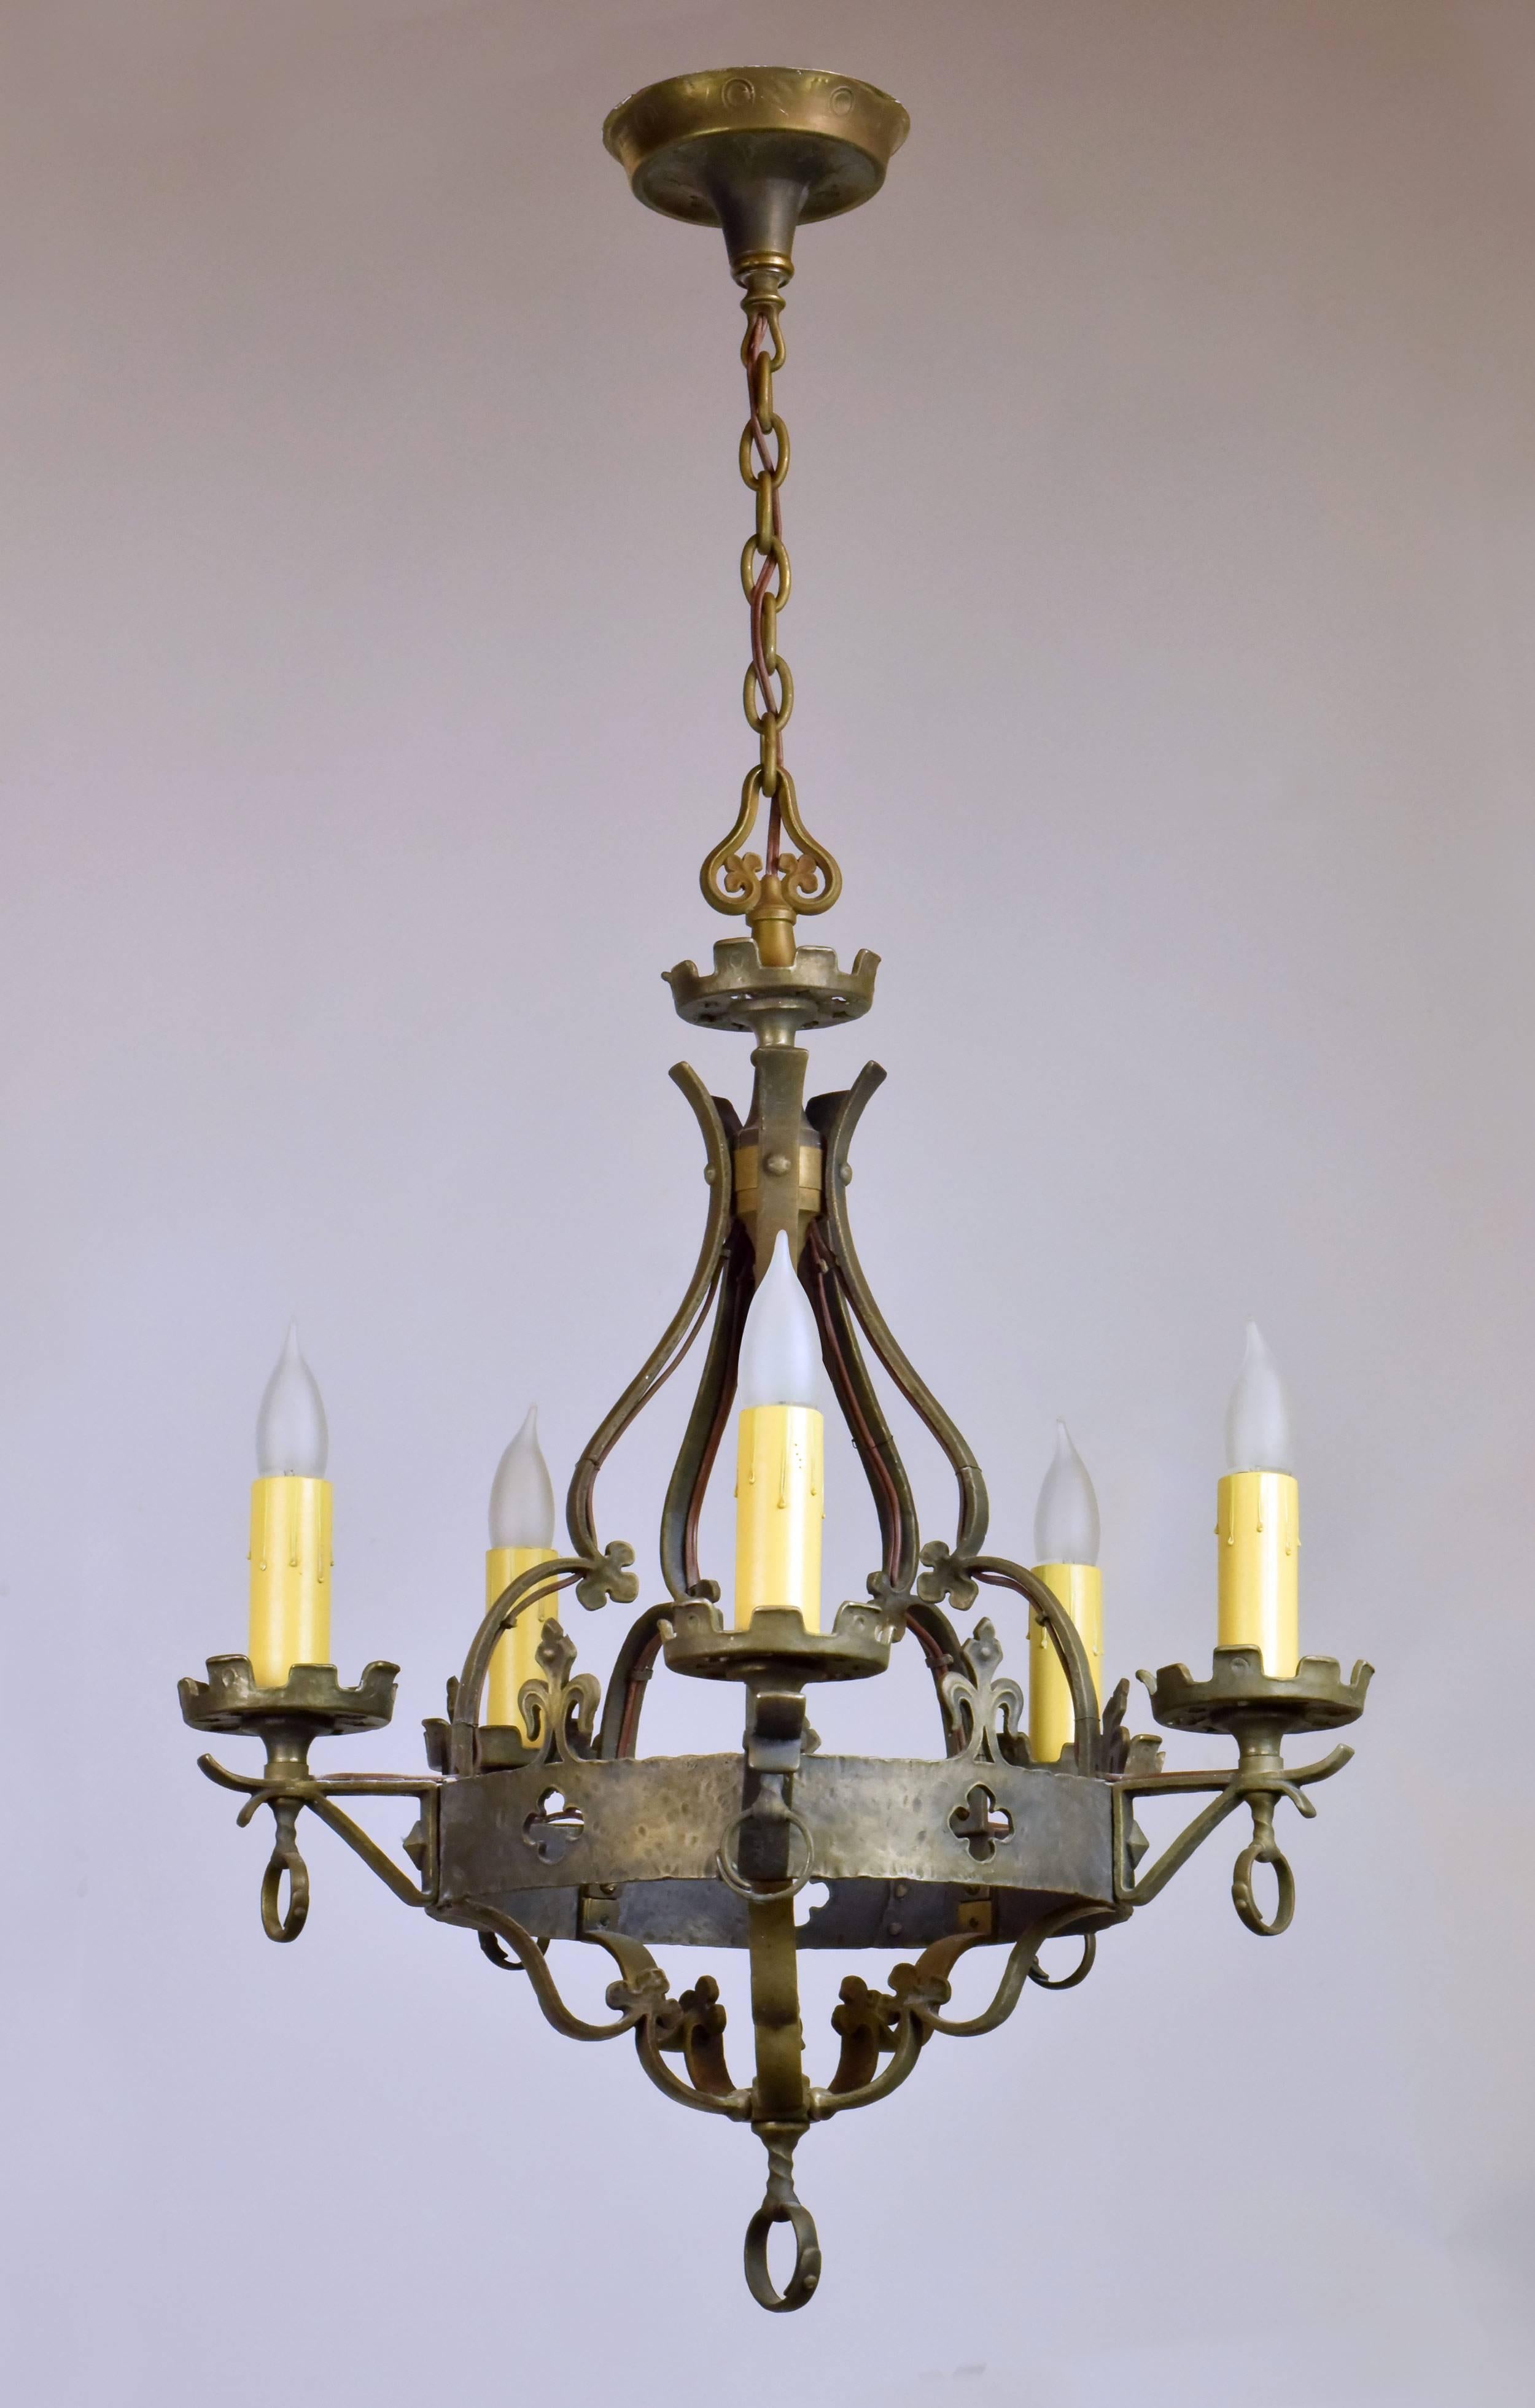 This heavy cast bronze five-candle chandelier is embellished with decorative quatrefoil and fleur-de-lis designs, both common in Tudor design. If you're looking for quality and craftsmanship and old world charm, this fixture has both in